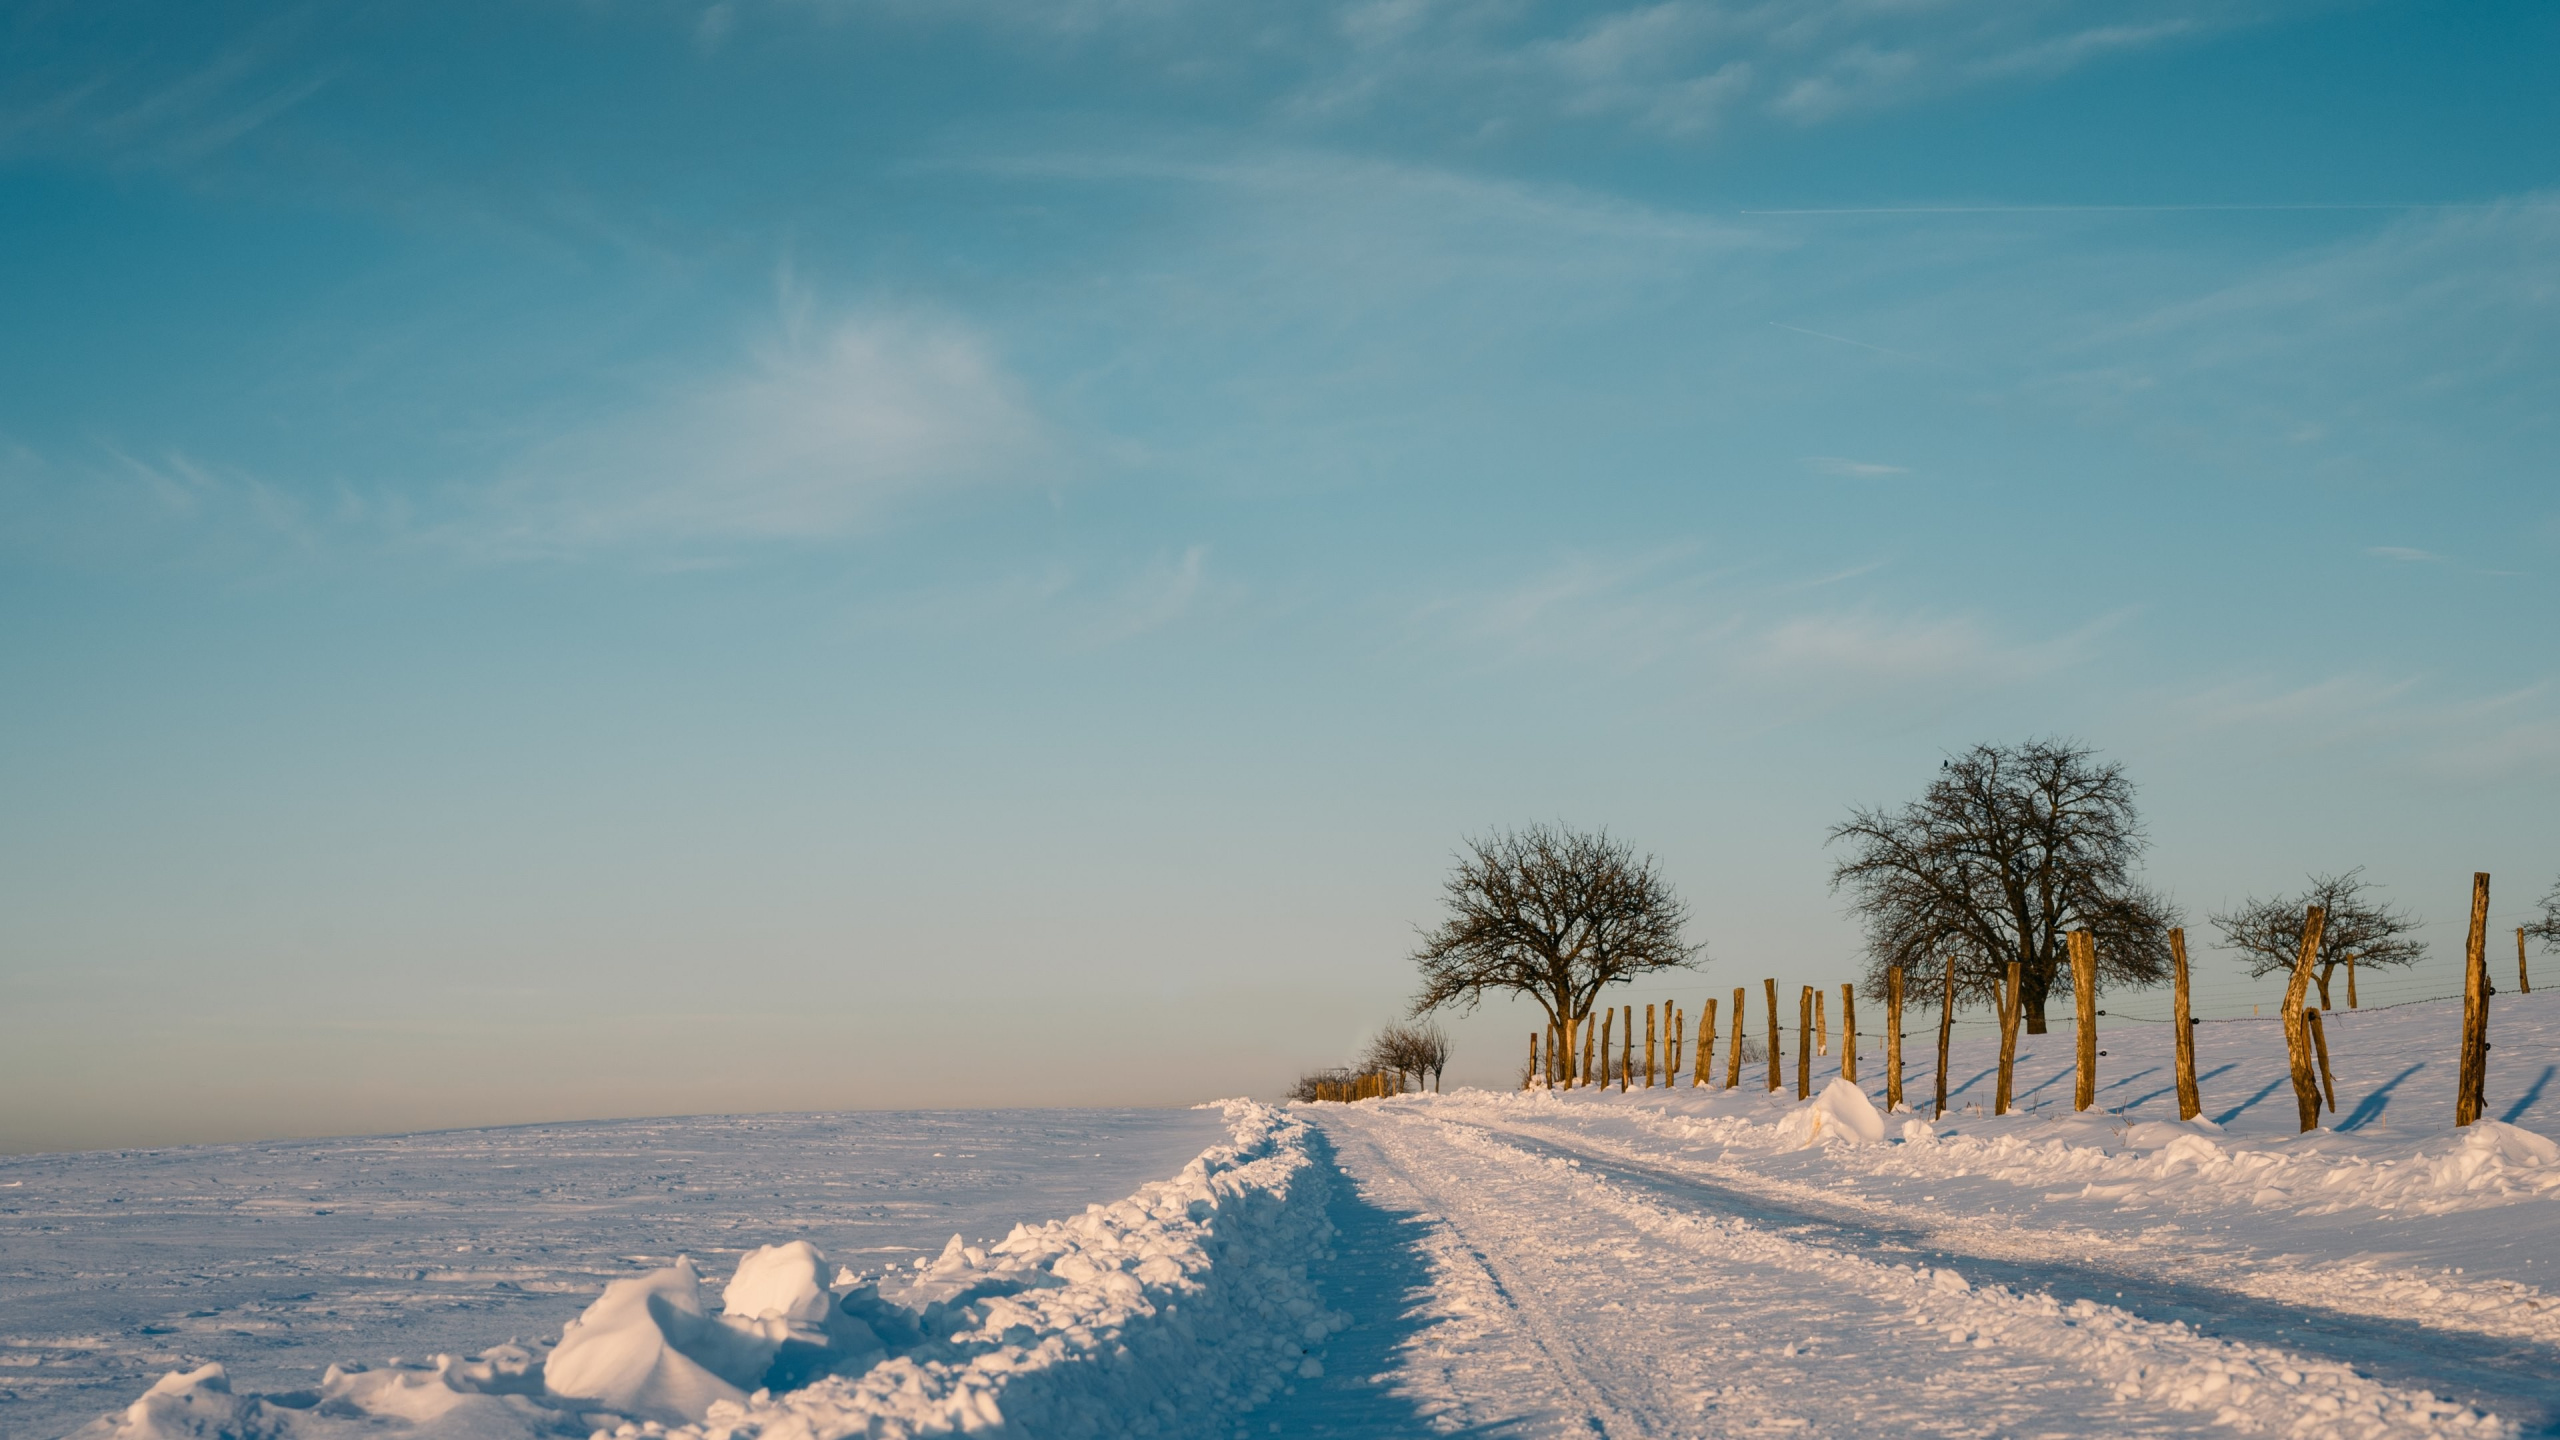 Bare Trees on Snow Covered Ground Under Blue Sky During Daytime. Wallpaper in 2560x1440 Resolution